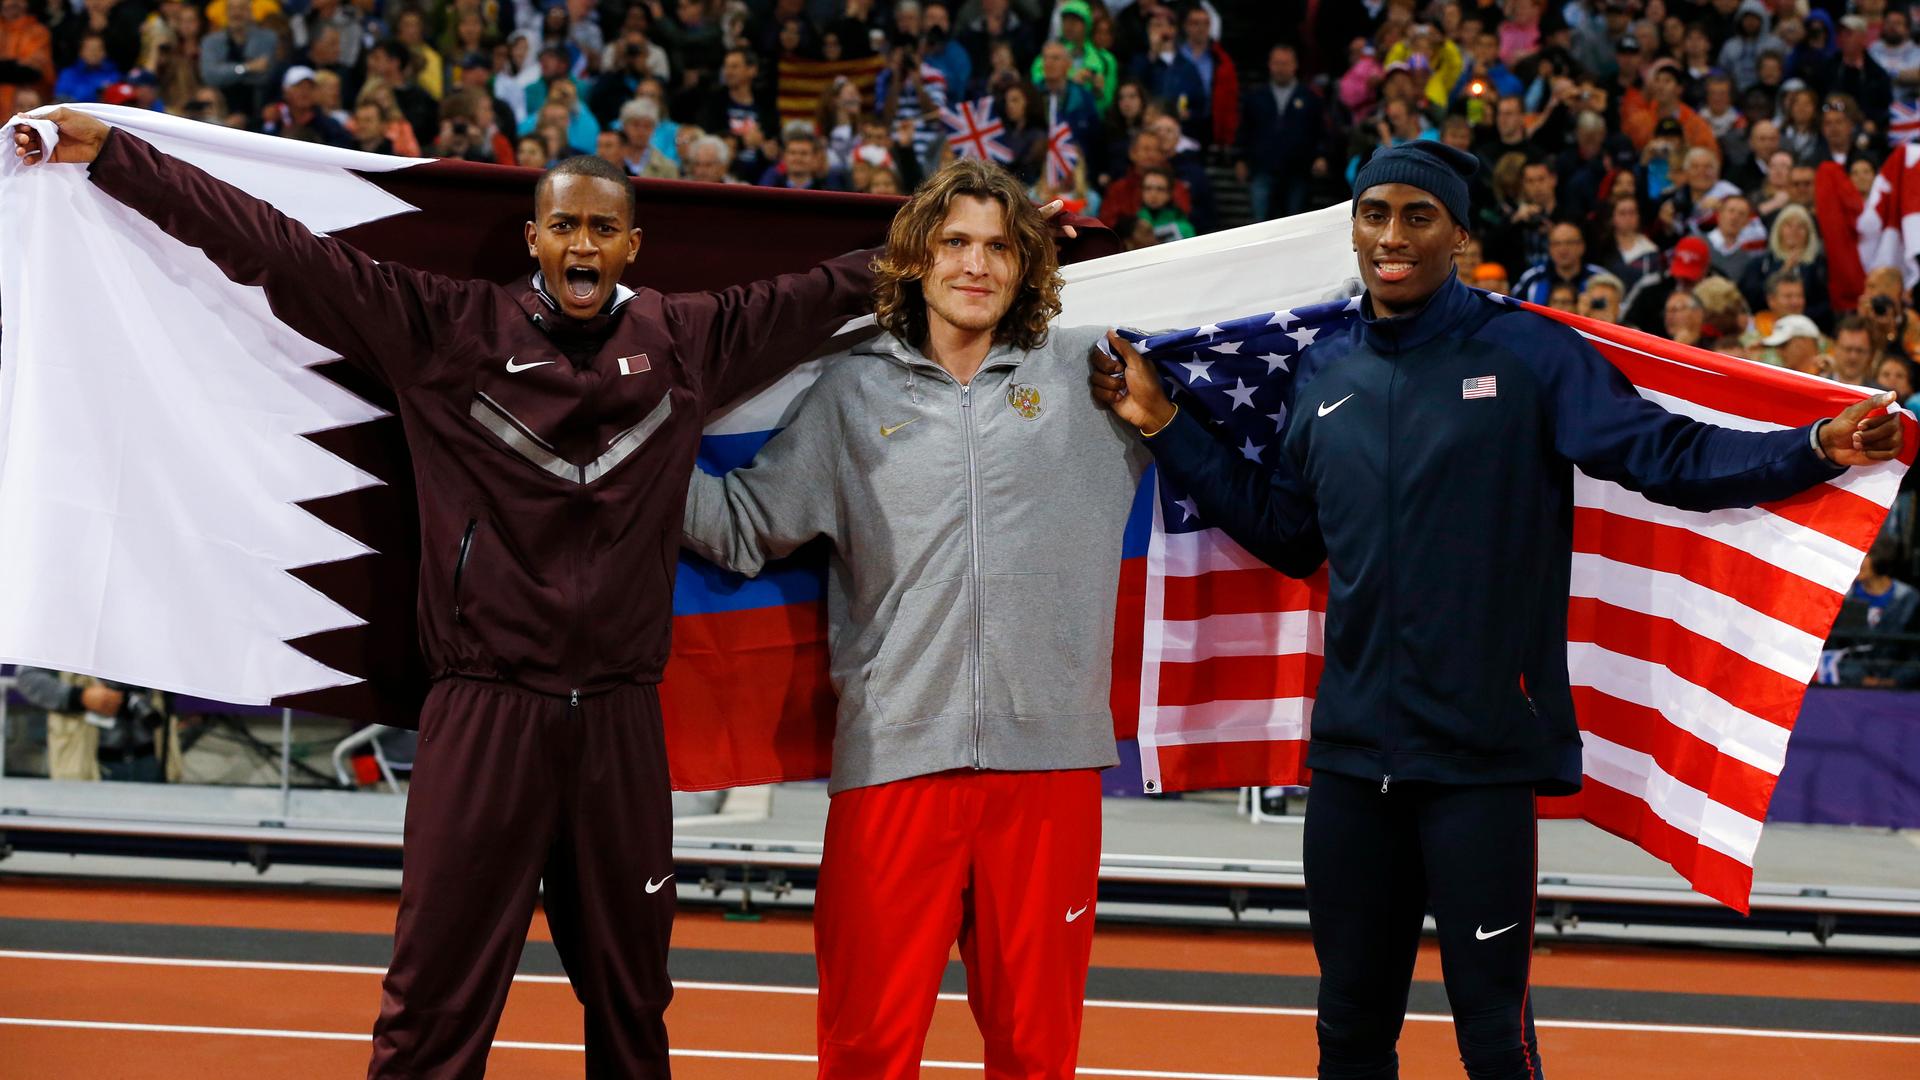 Gold medallist Russia's Ivan Ukhov, silver medallist Erik Kynard of the U.S. (R) and bronze medallist Qatar's Mutaz Essa Barshim (L) hold their national flags after the men's high jump final during the London 2012 Olympic Games.